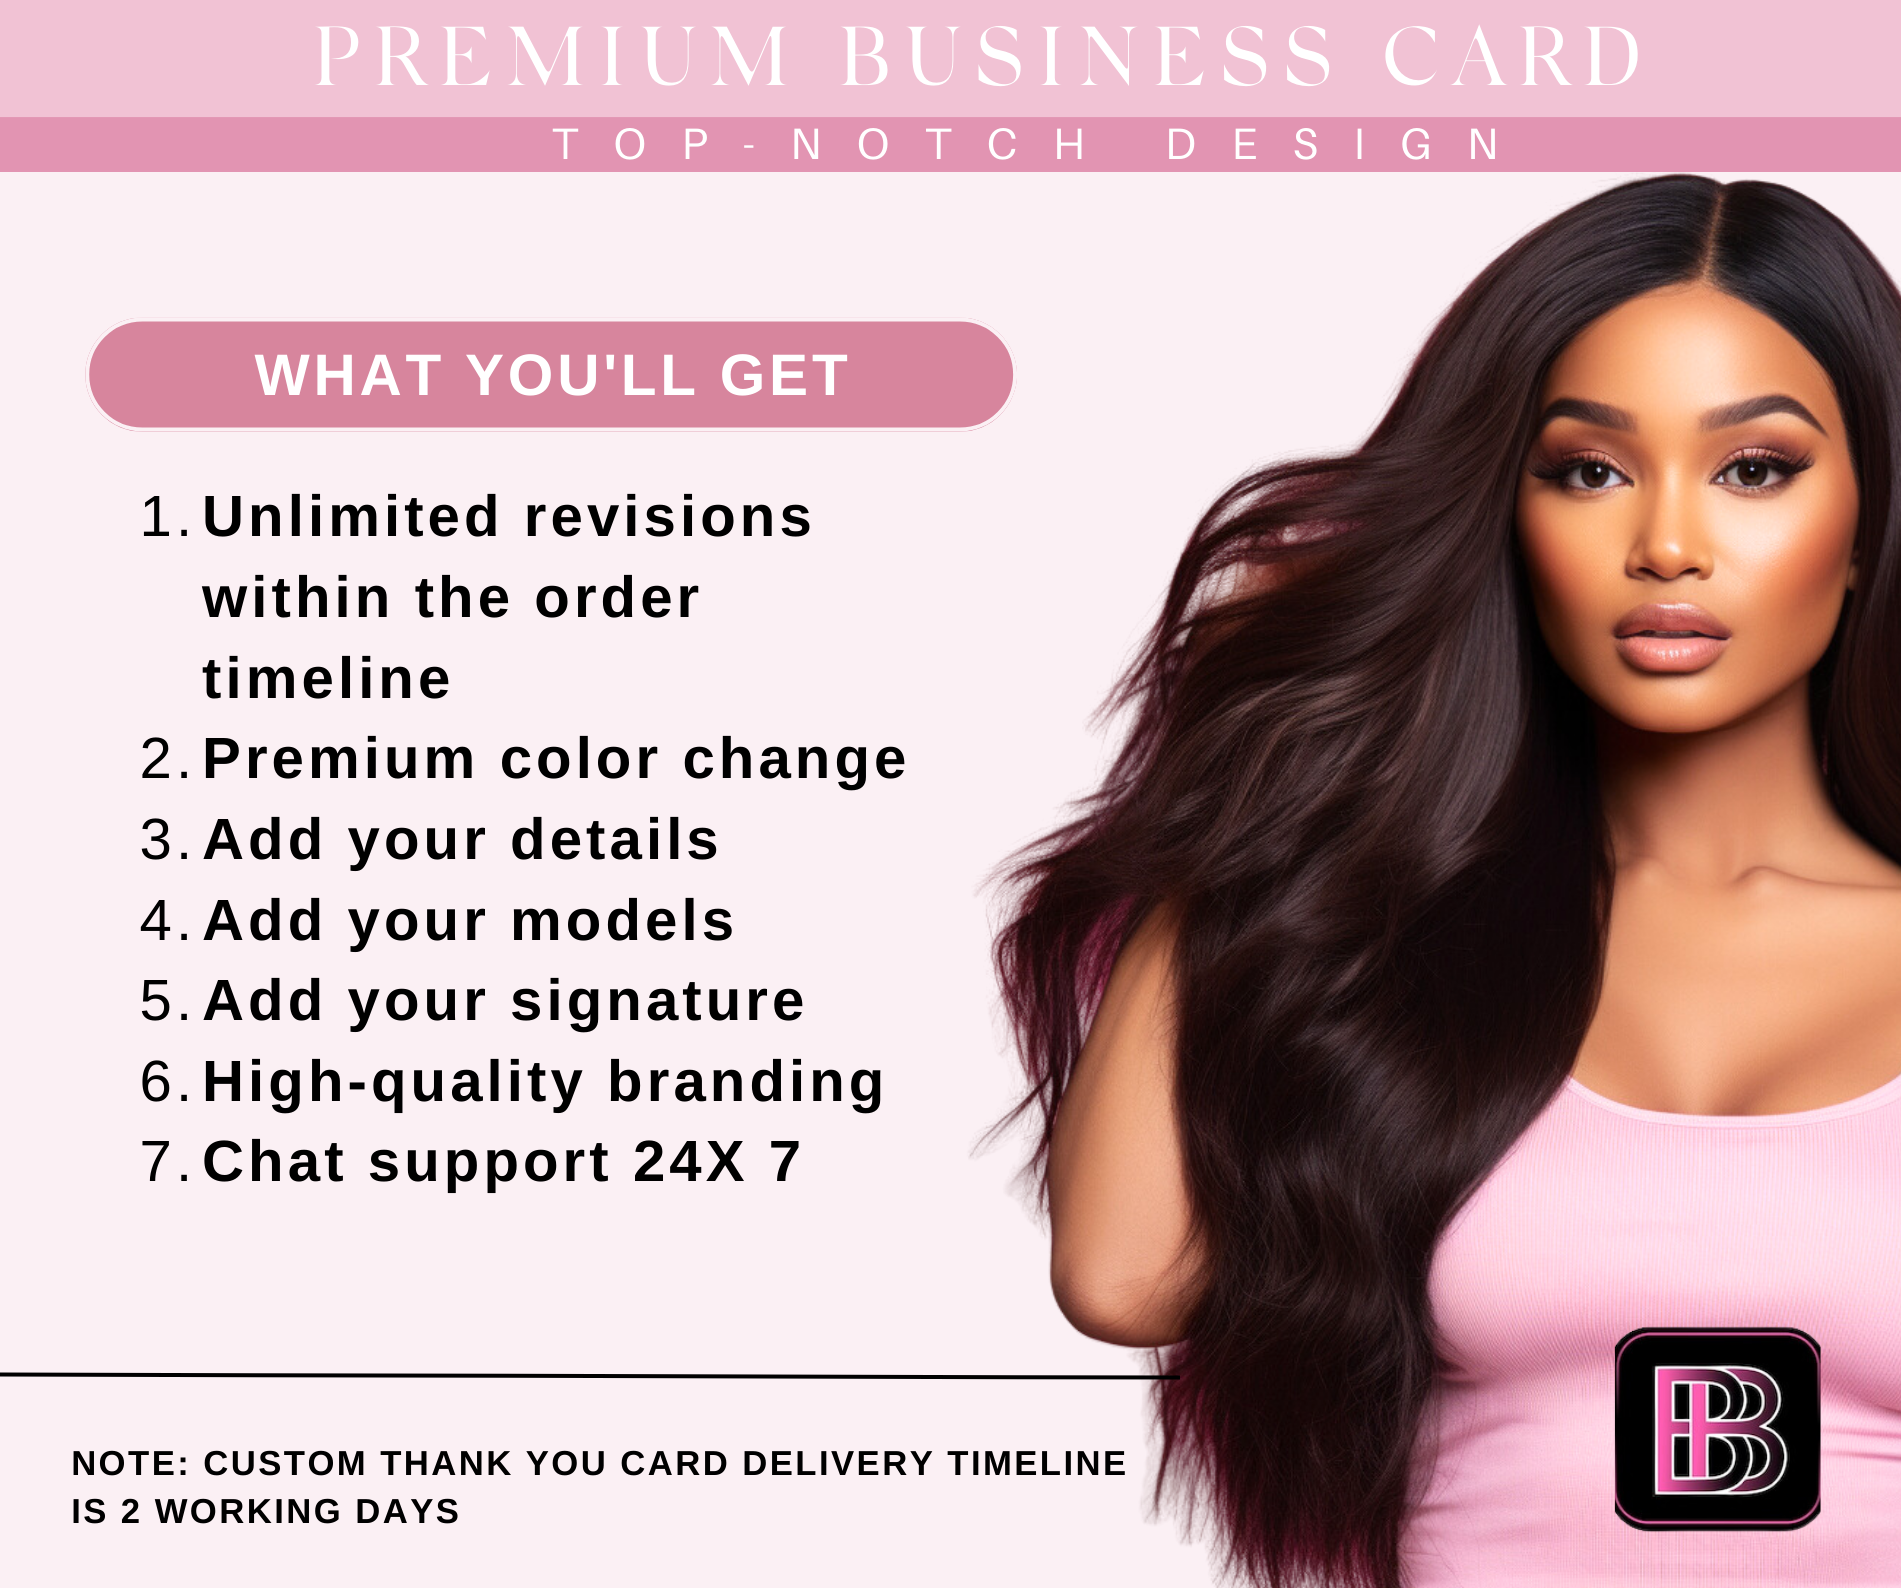 Premium Business Card (Design Only)